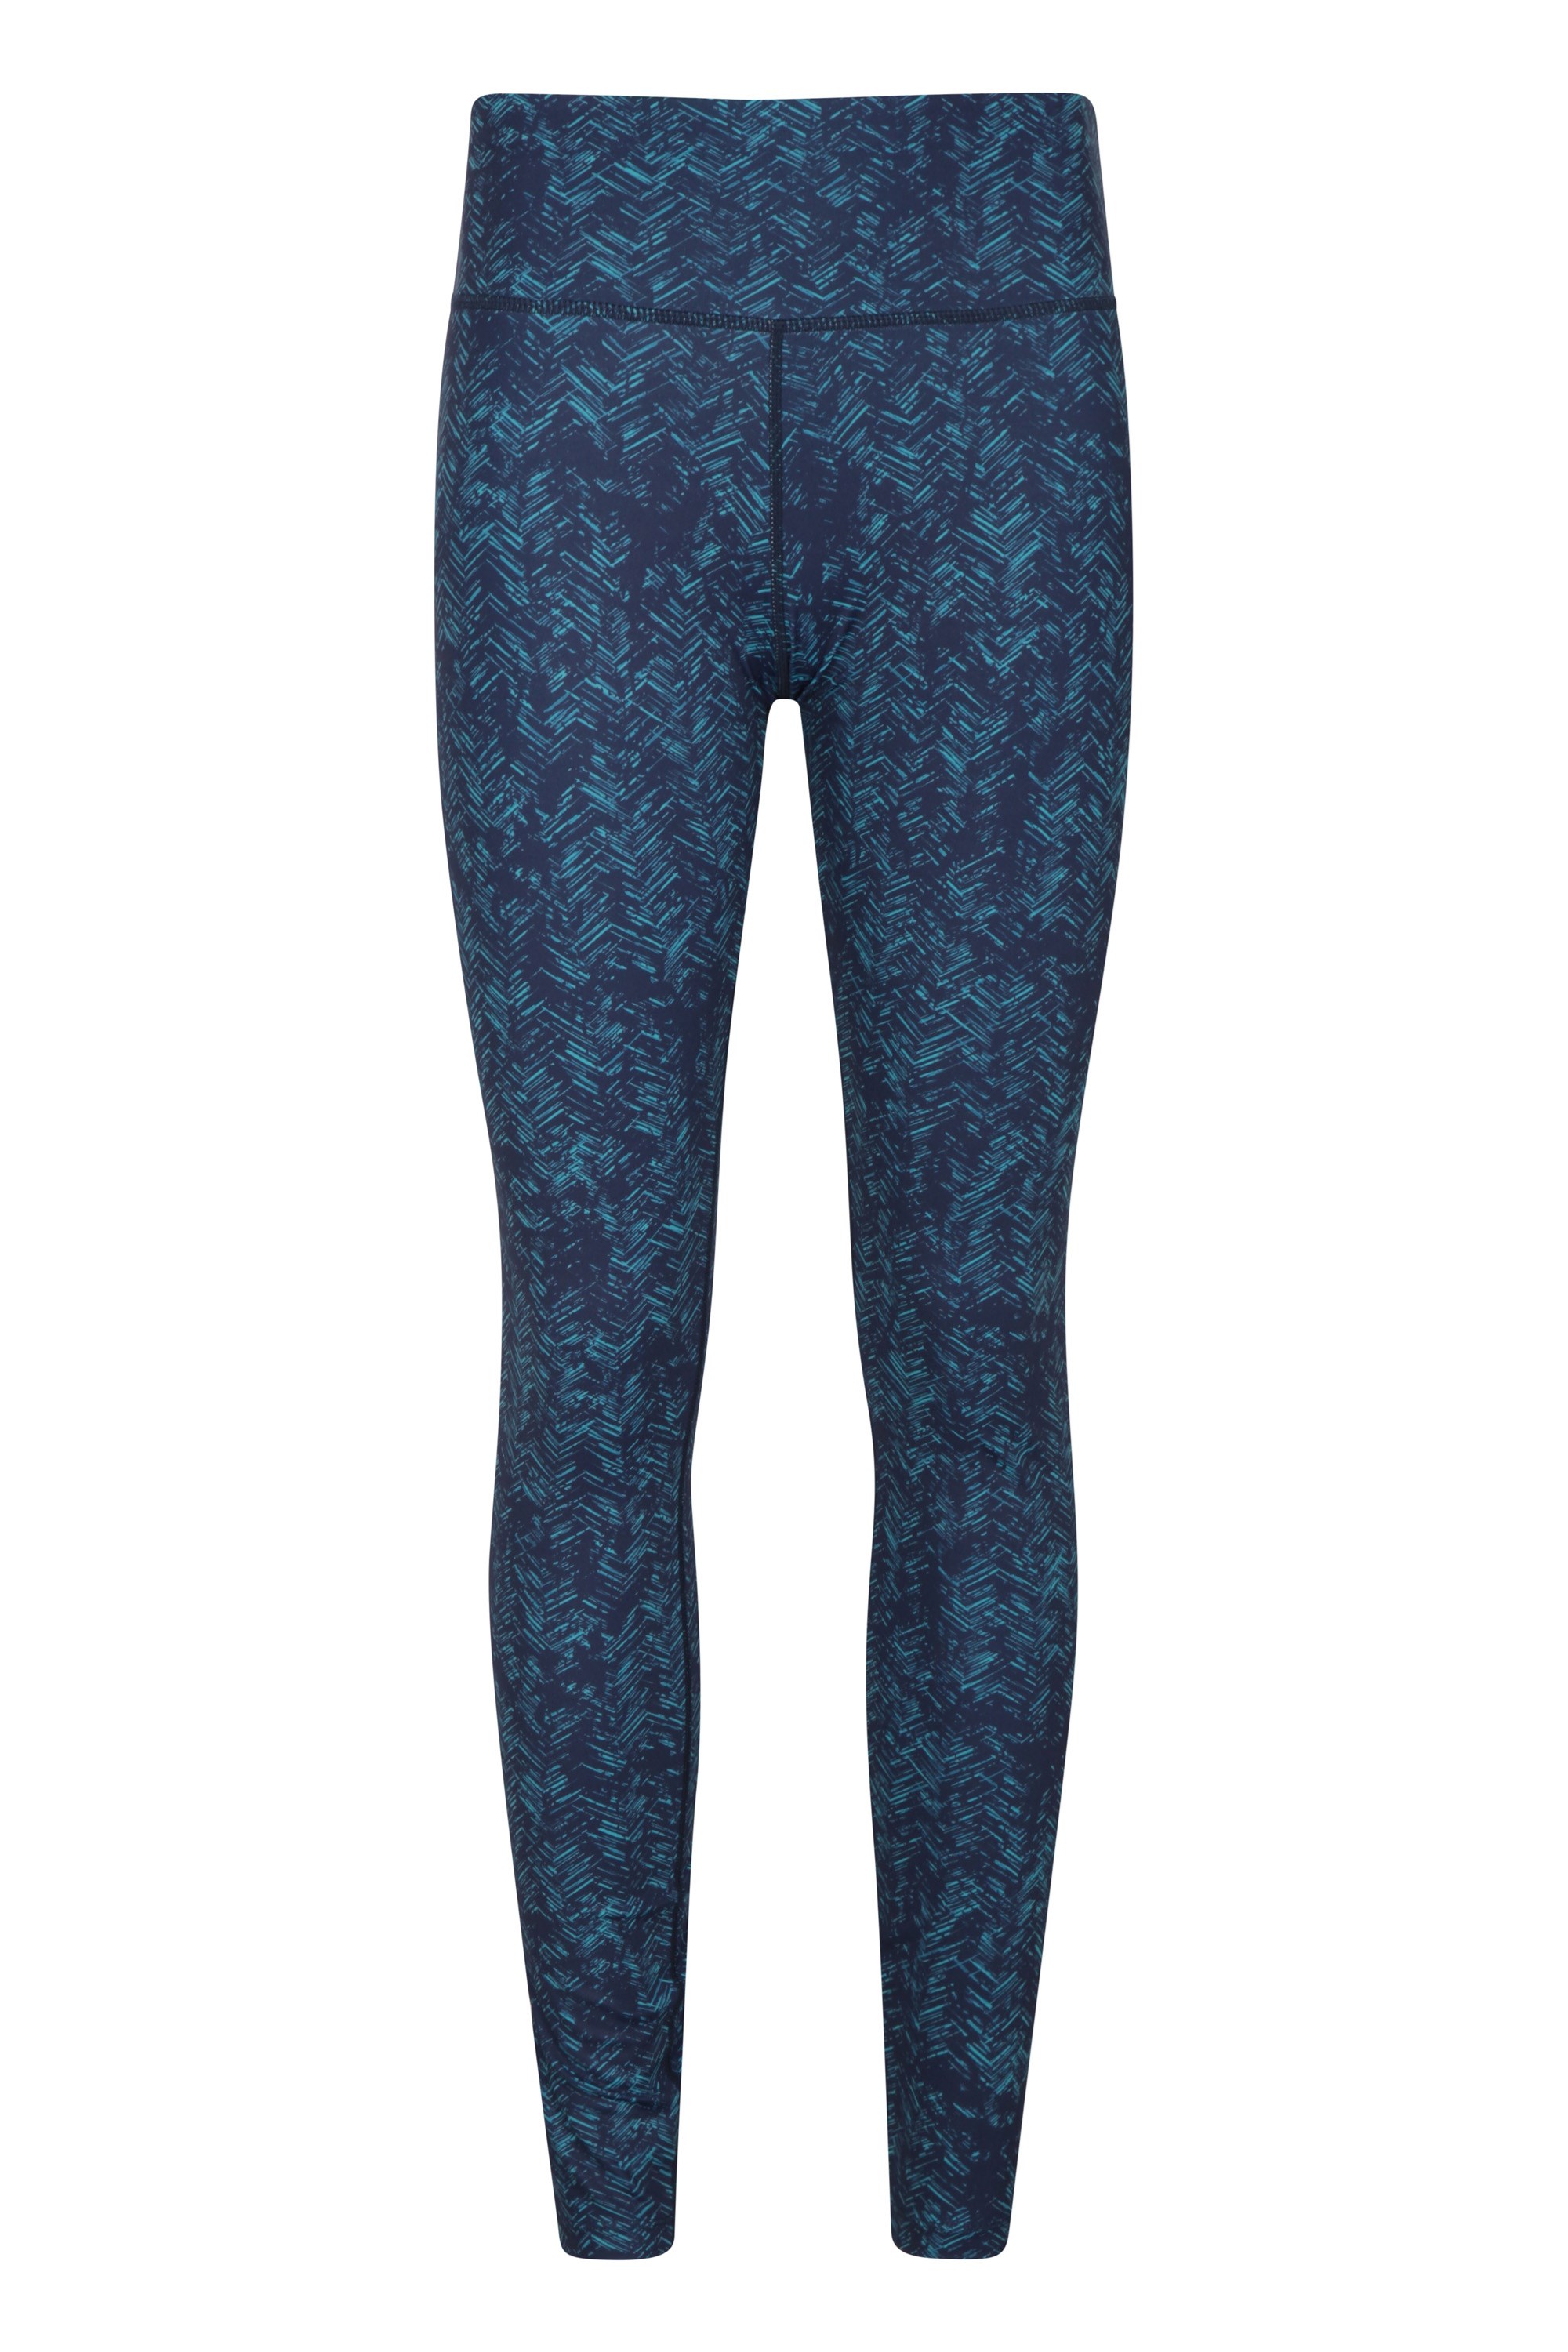 Buy Mountain Warehouse Grey Breathe and Balance High Waisted Sports Leggings  Multipack from Next Belgium